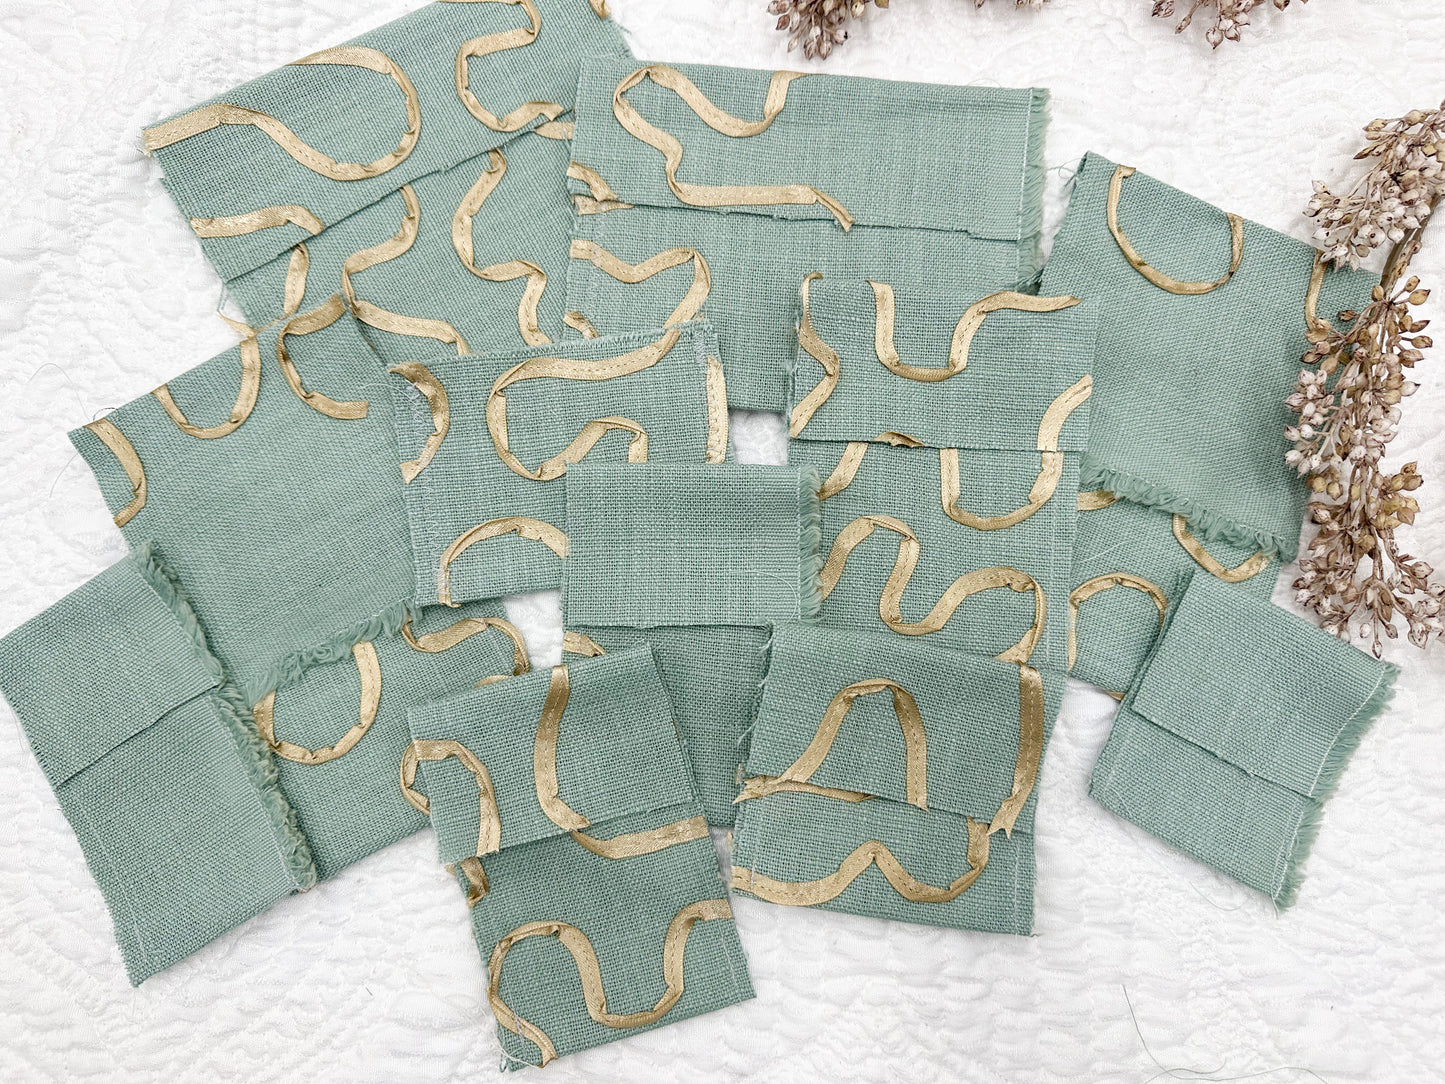 Rough Sewn Teal Fabric Pockets (Set of 11)